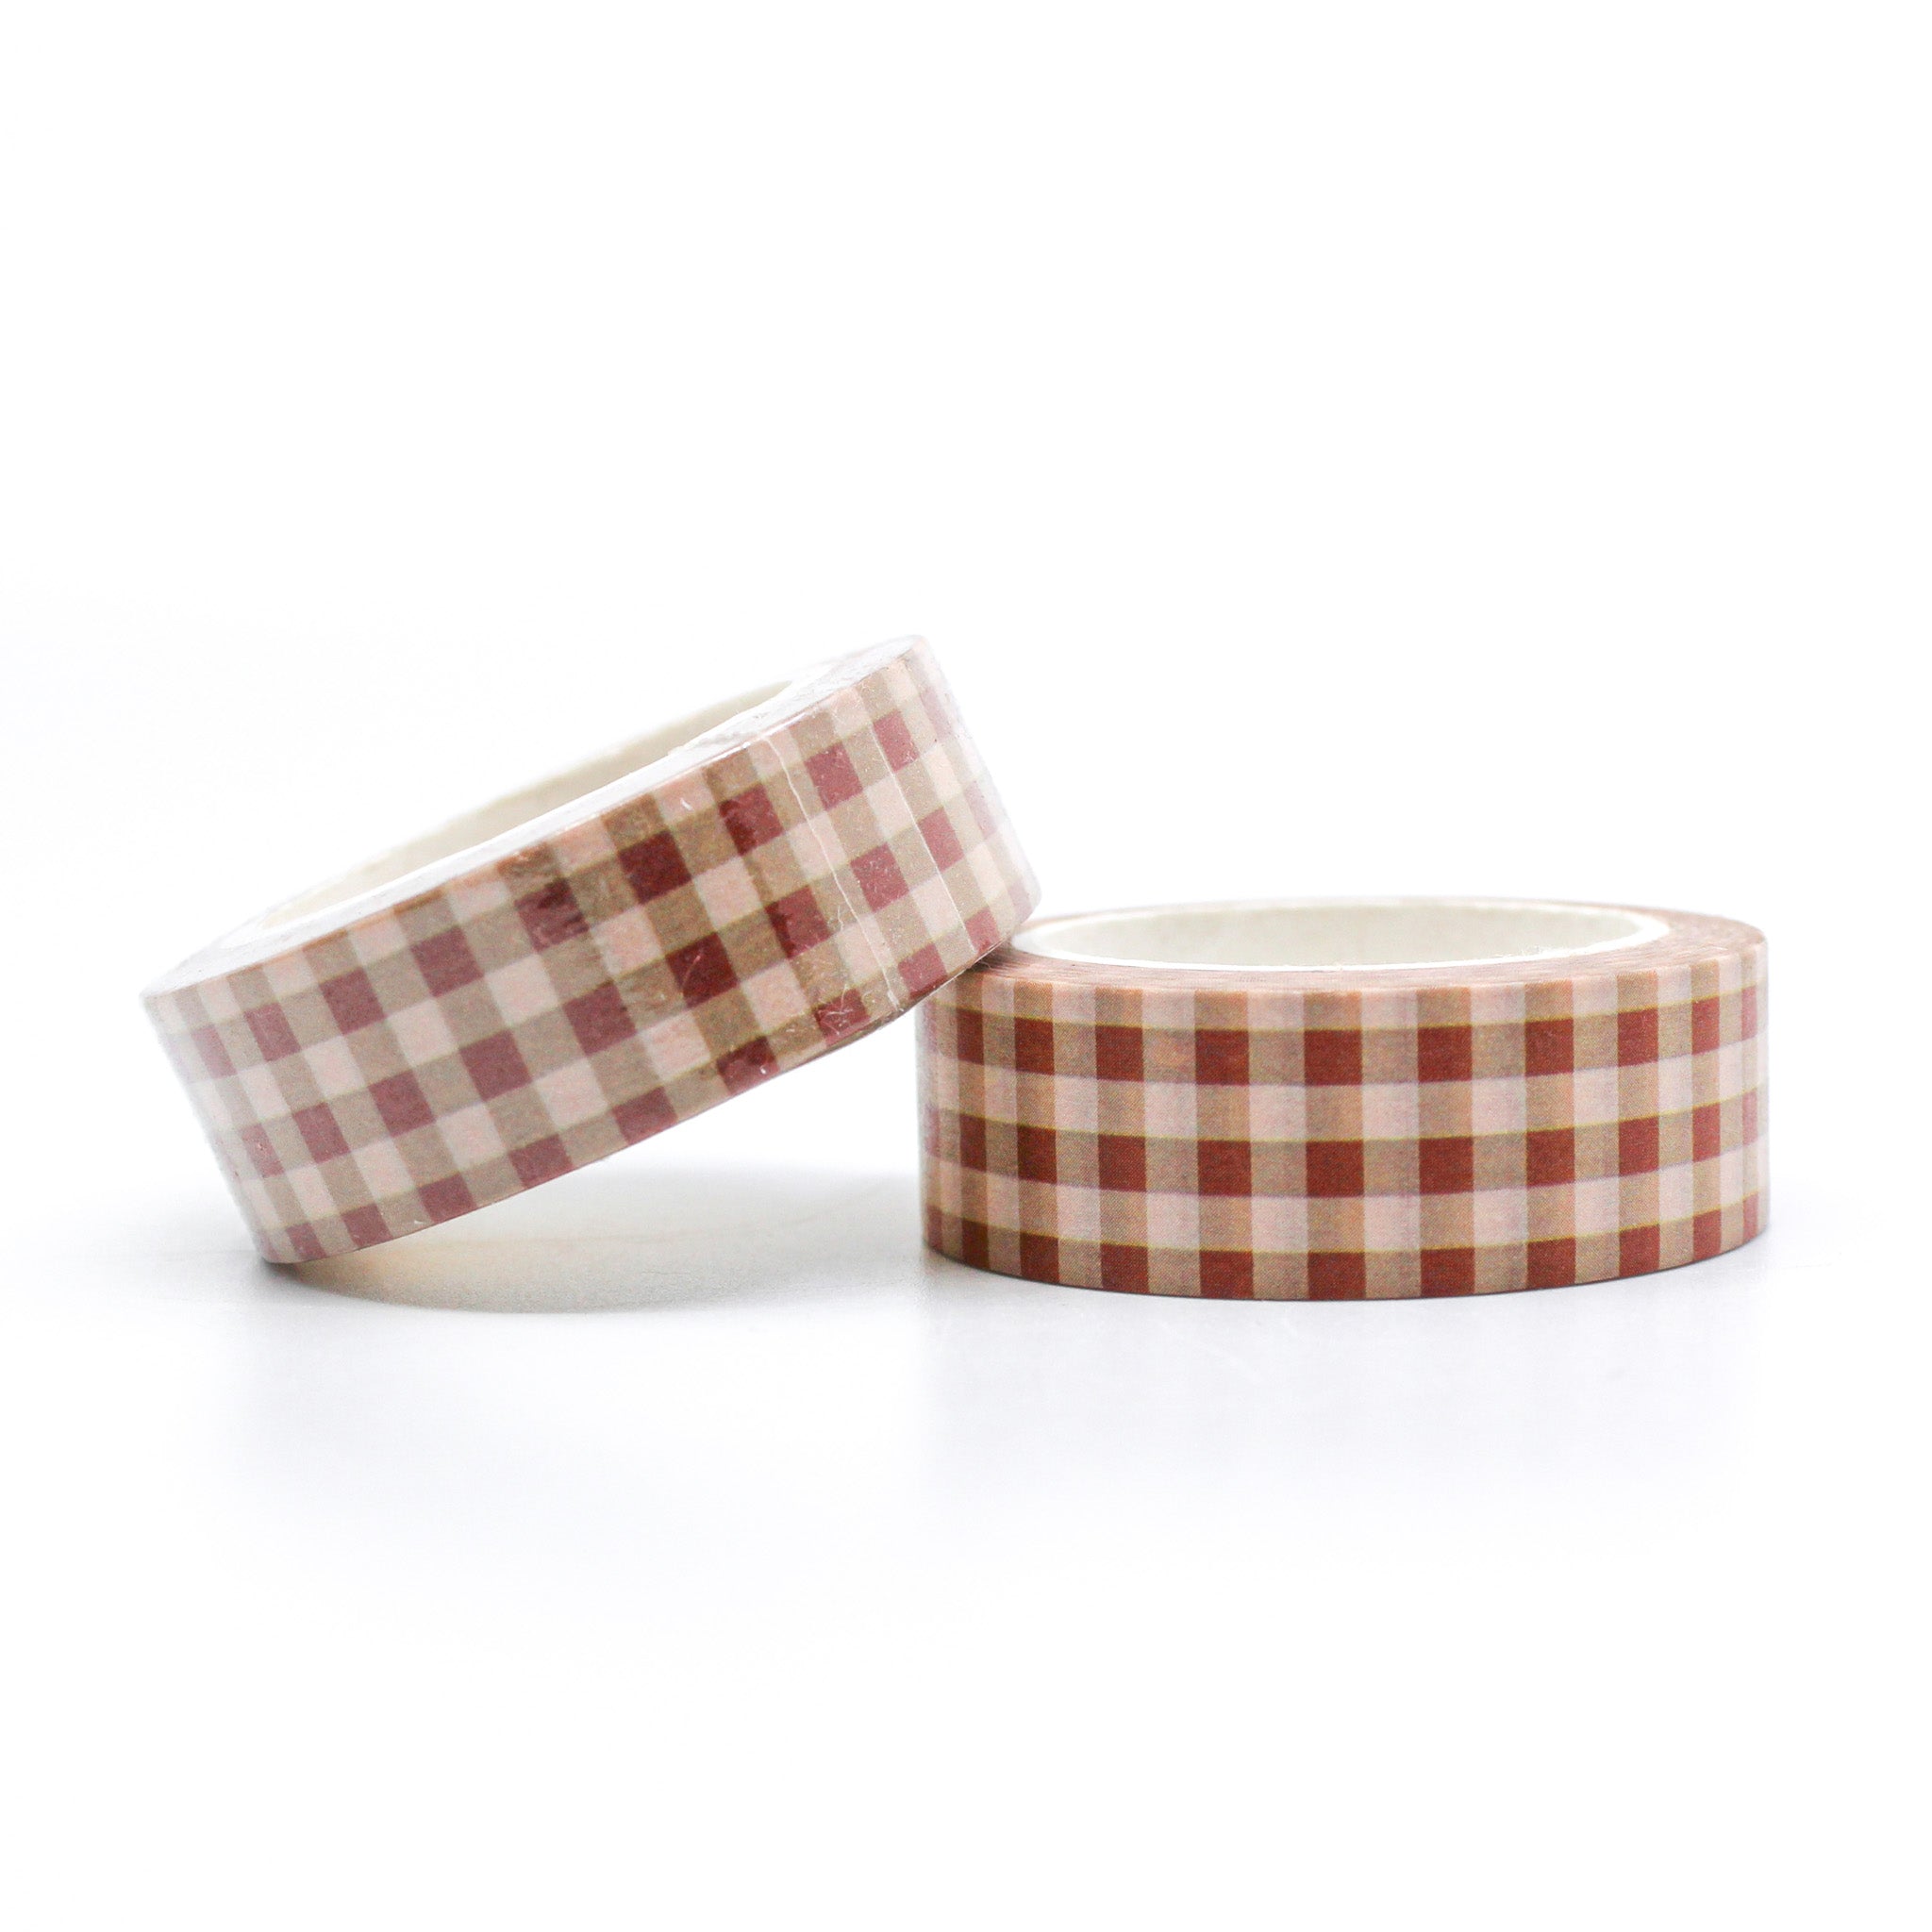 This is a yellow plaid pattern washi tapes for Journal Supplies, Scrapbooking from BBB Supplies Craft Shop